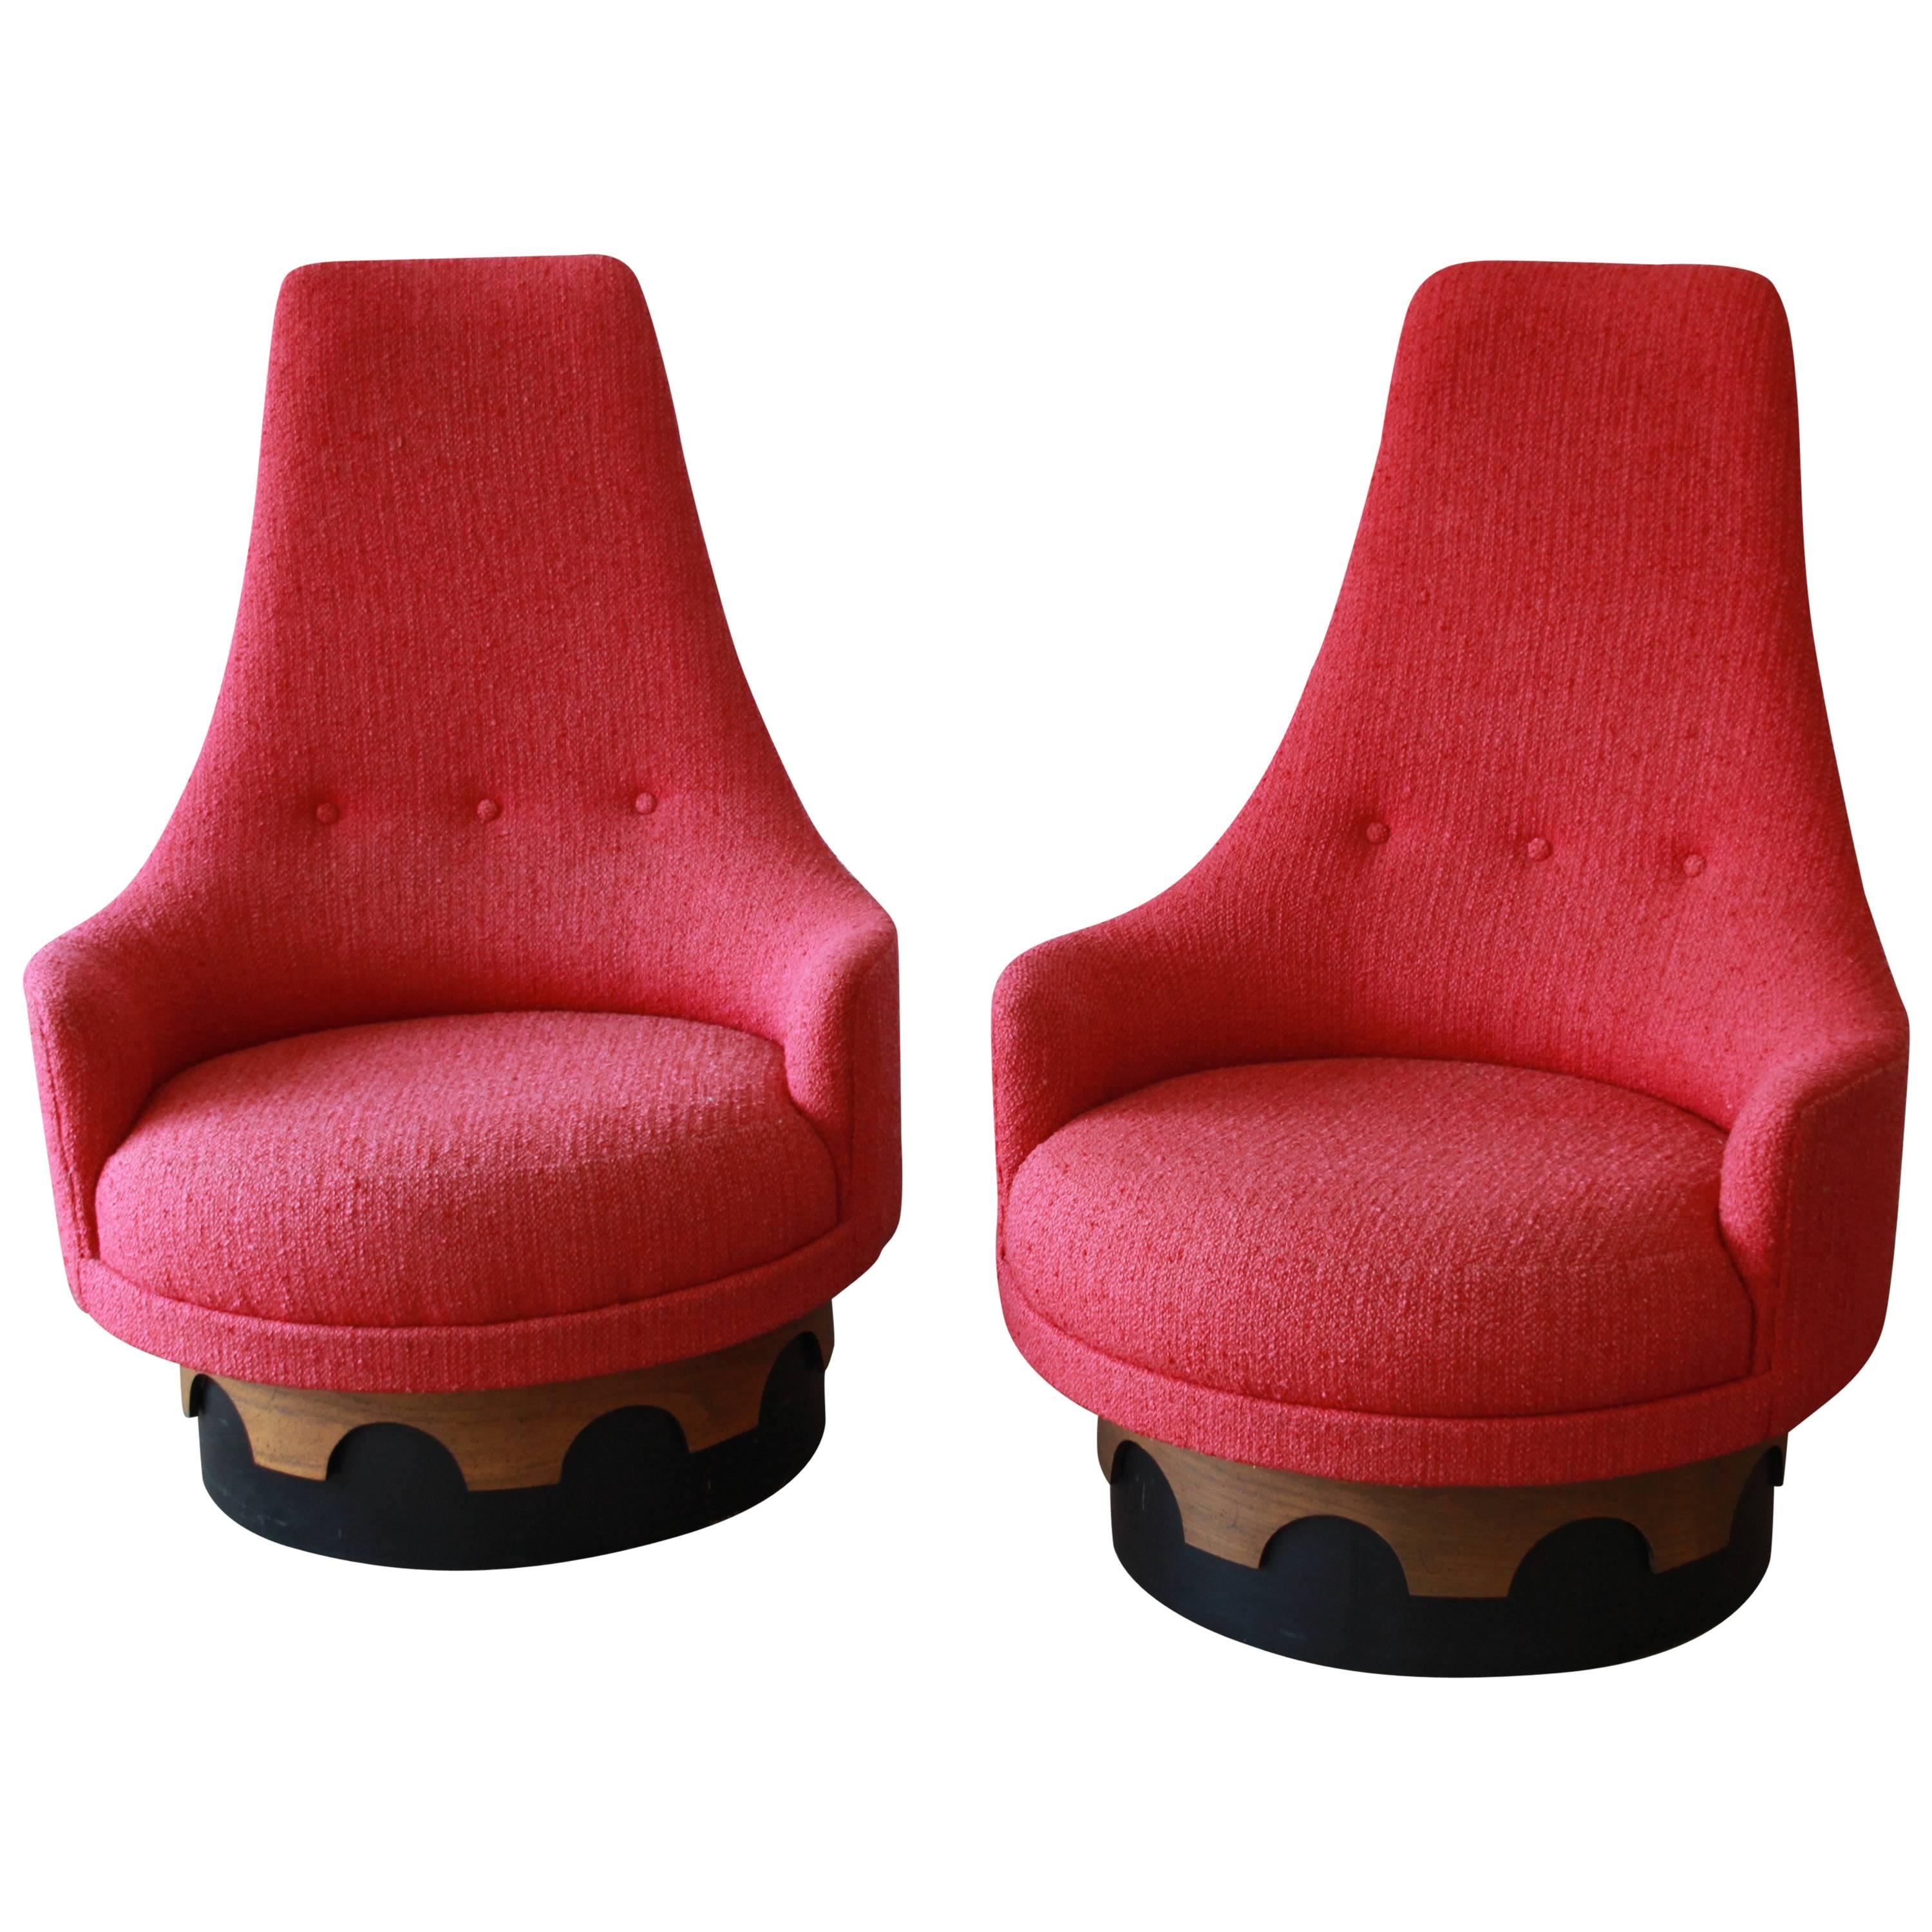 Adrian Pearsall High Back Swivel Chairs, 1960s